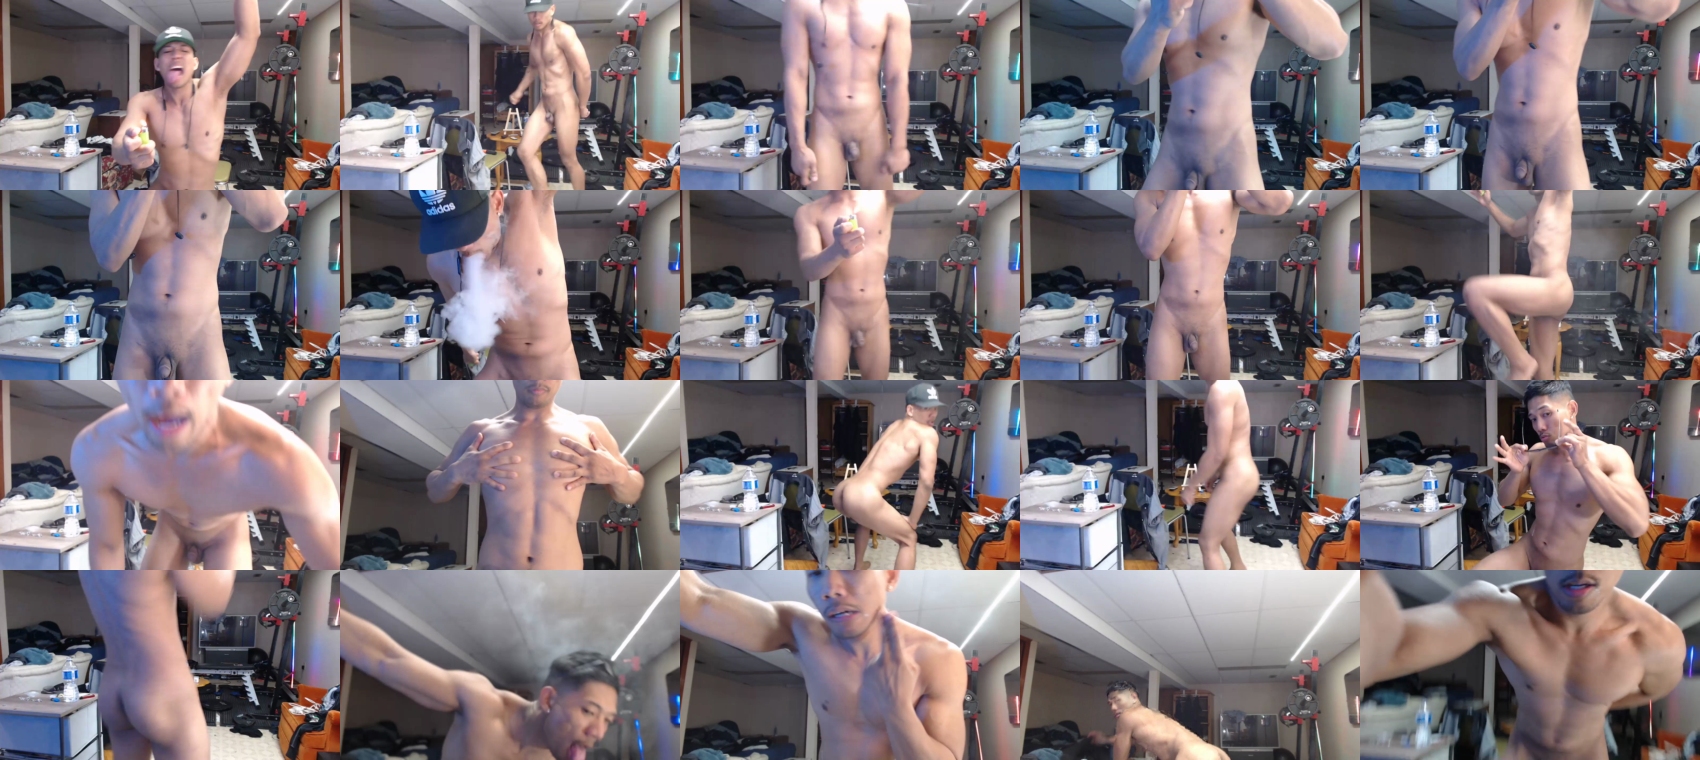 chadclouds  03-08-2022 Males fuck